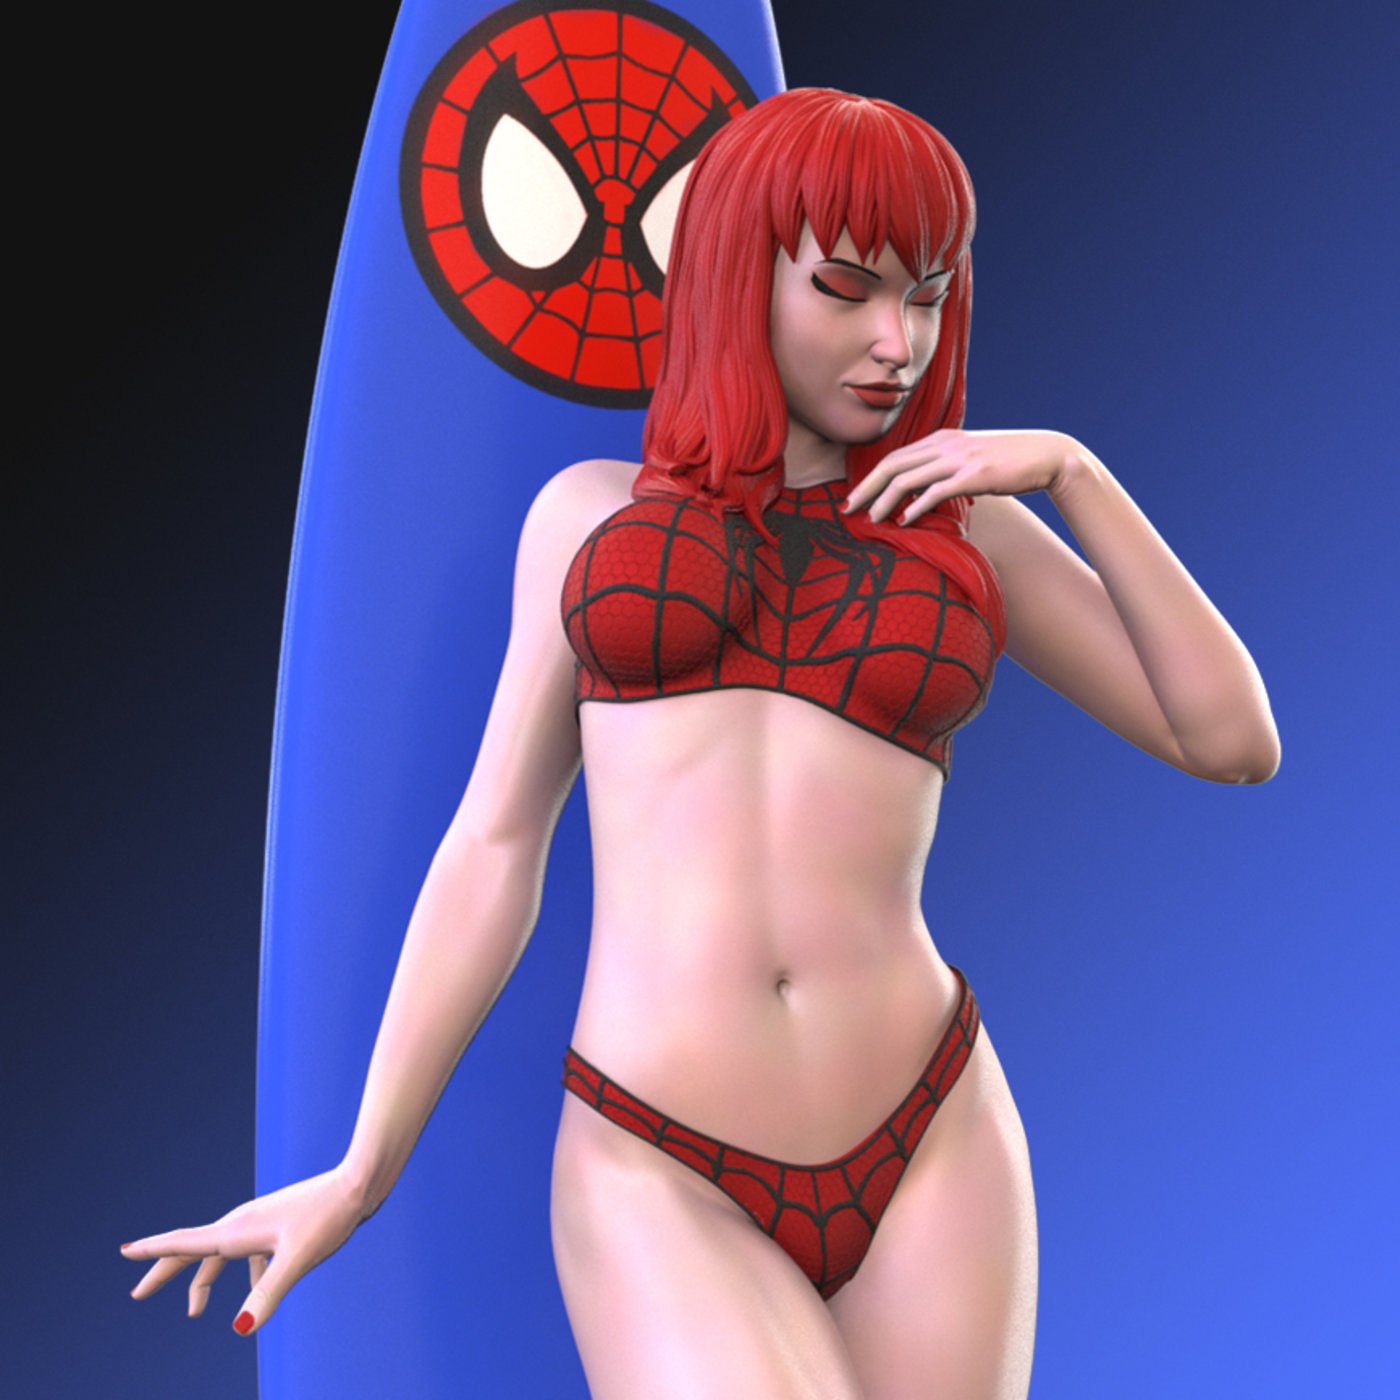 MJ Surfing Outfit from Spiderman